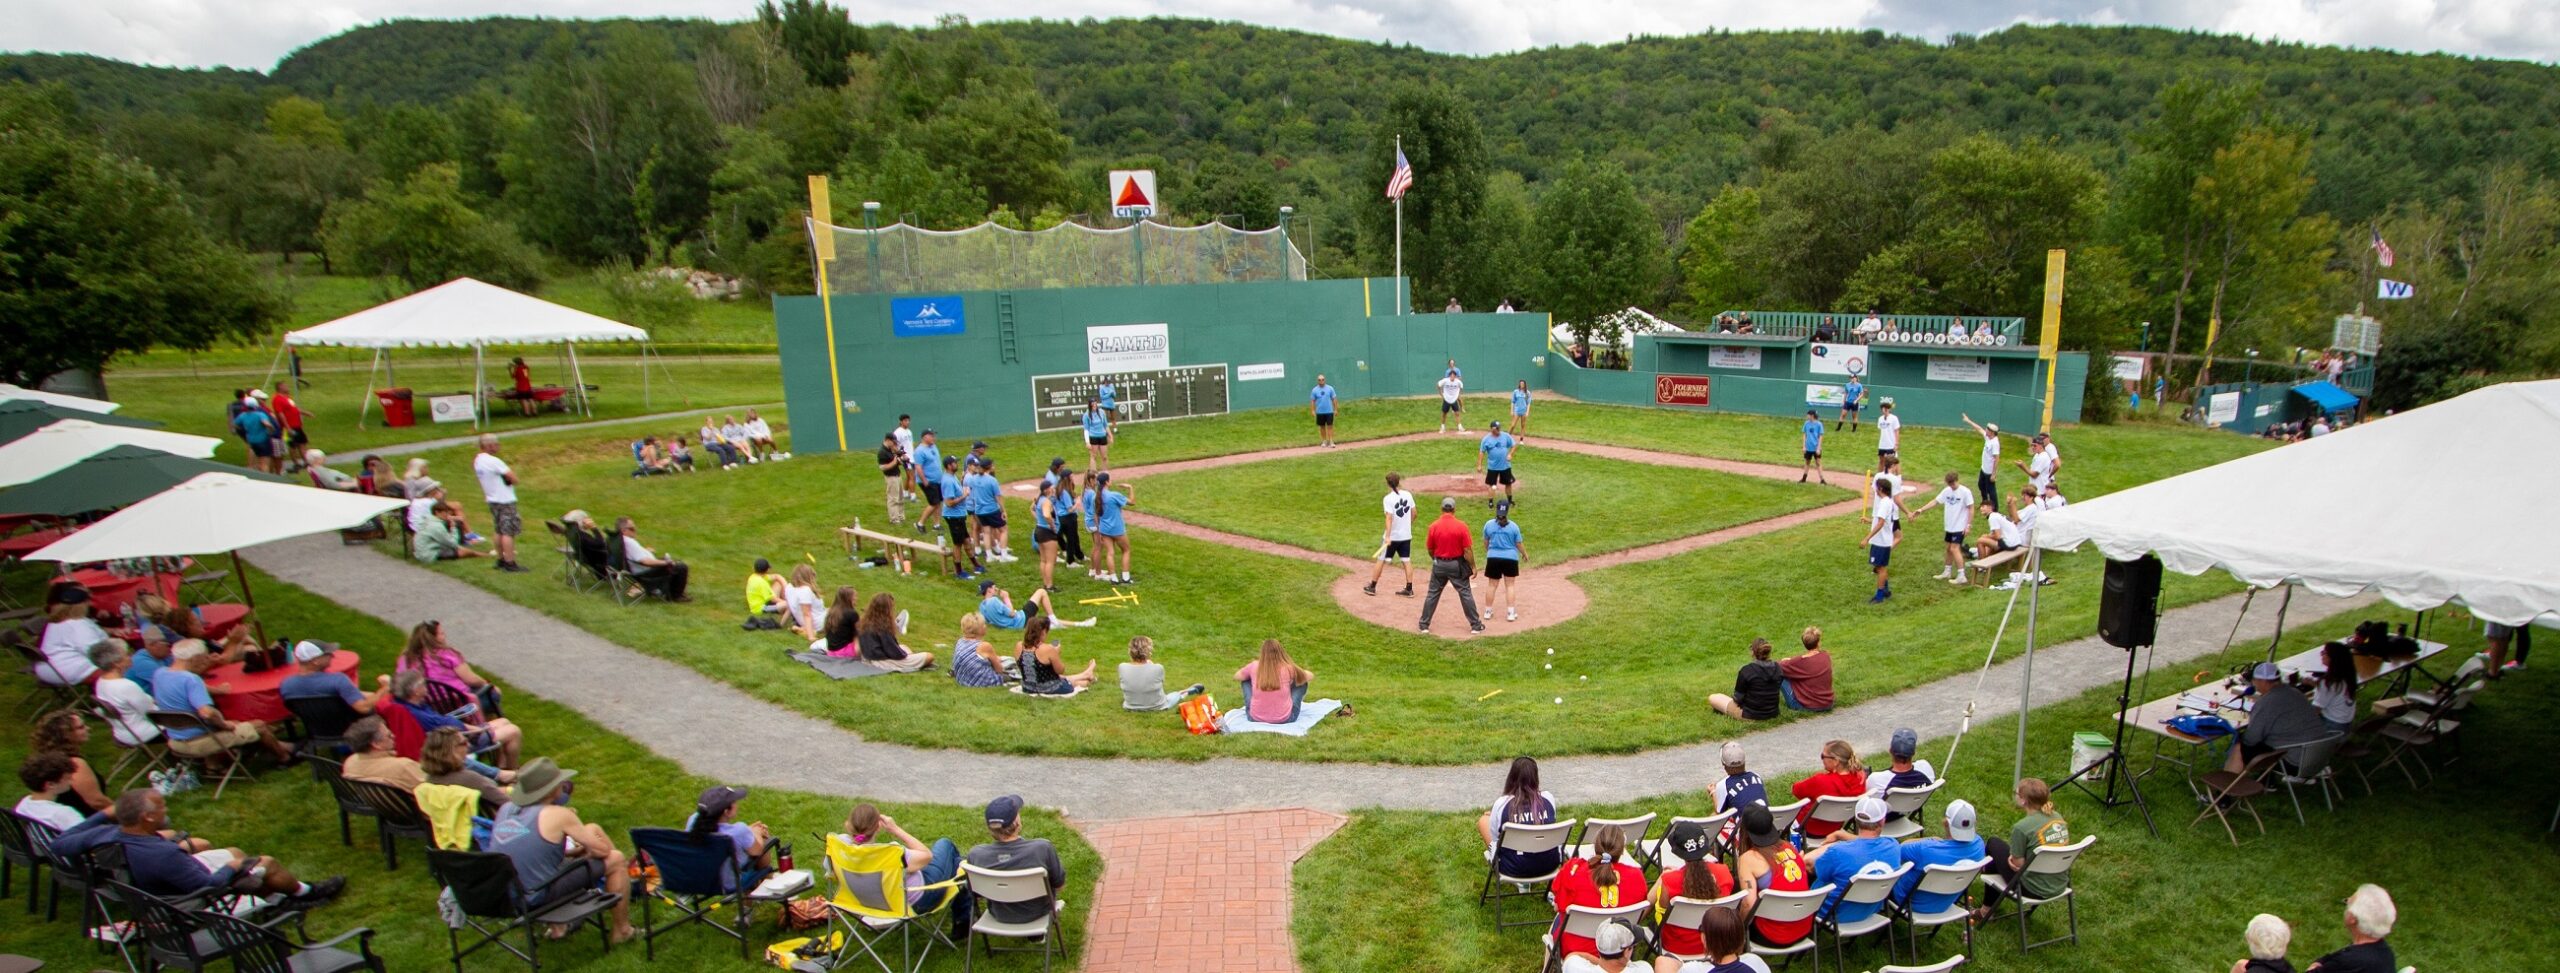 Home Slider 1 – 12th Annual Vermont Summer Classic Schedule